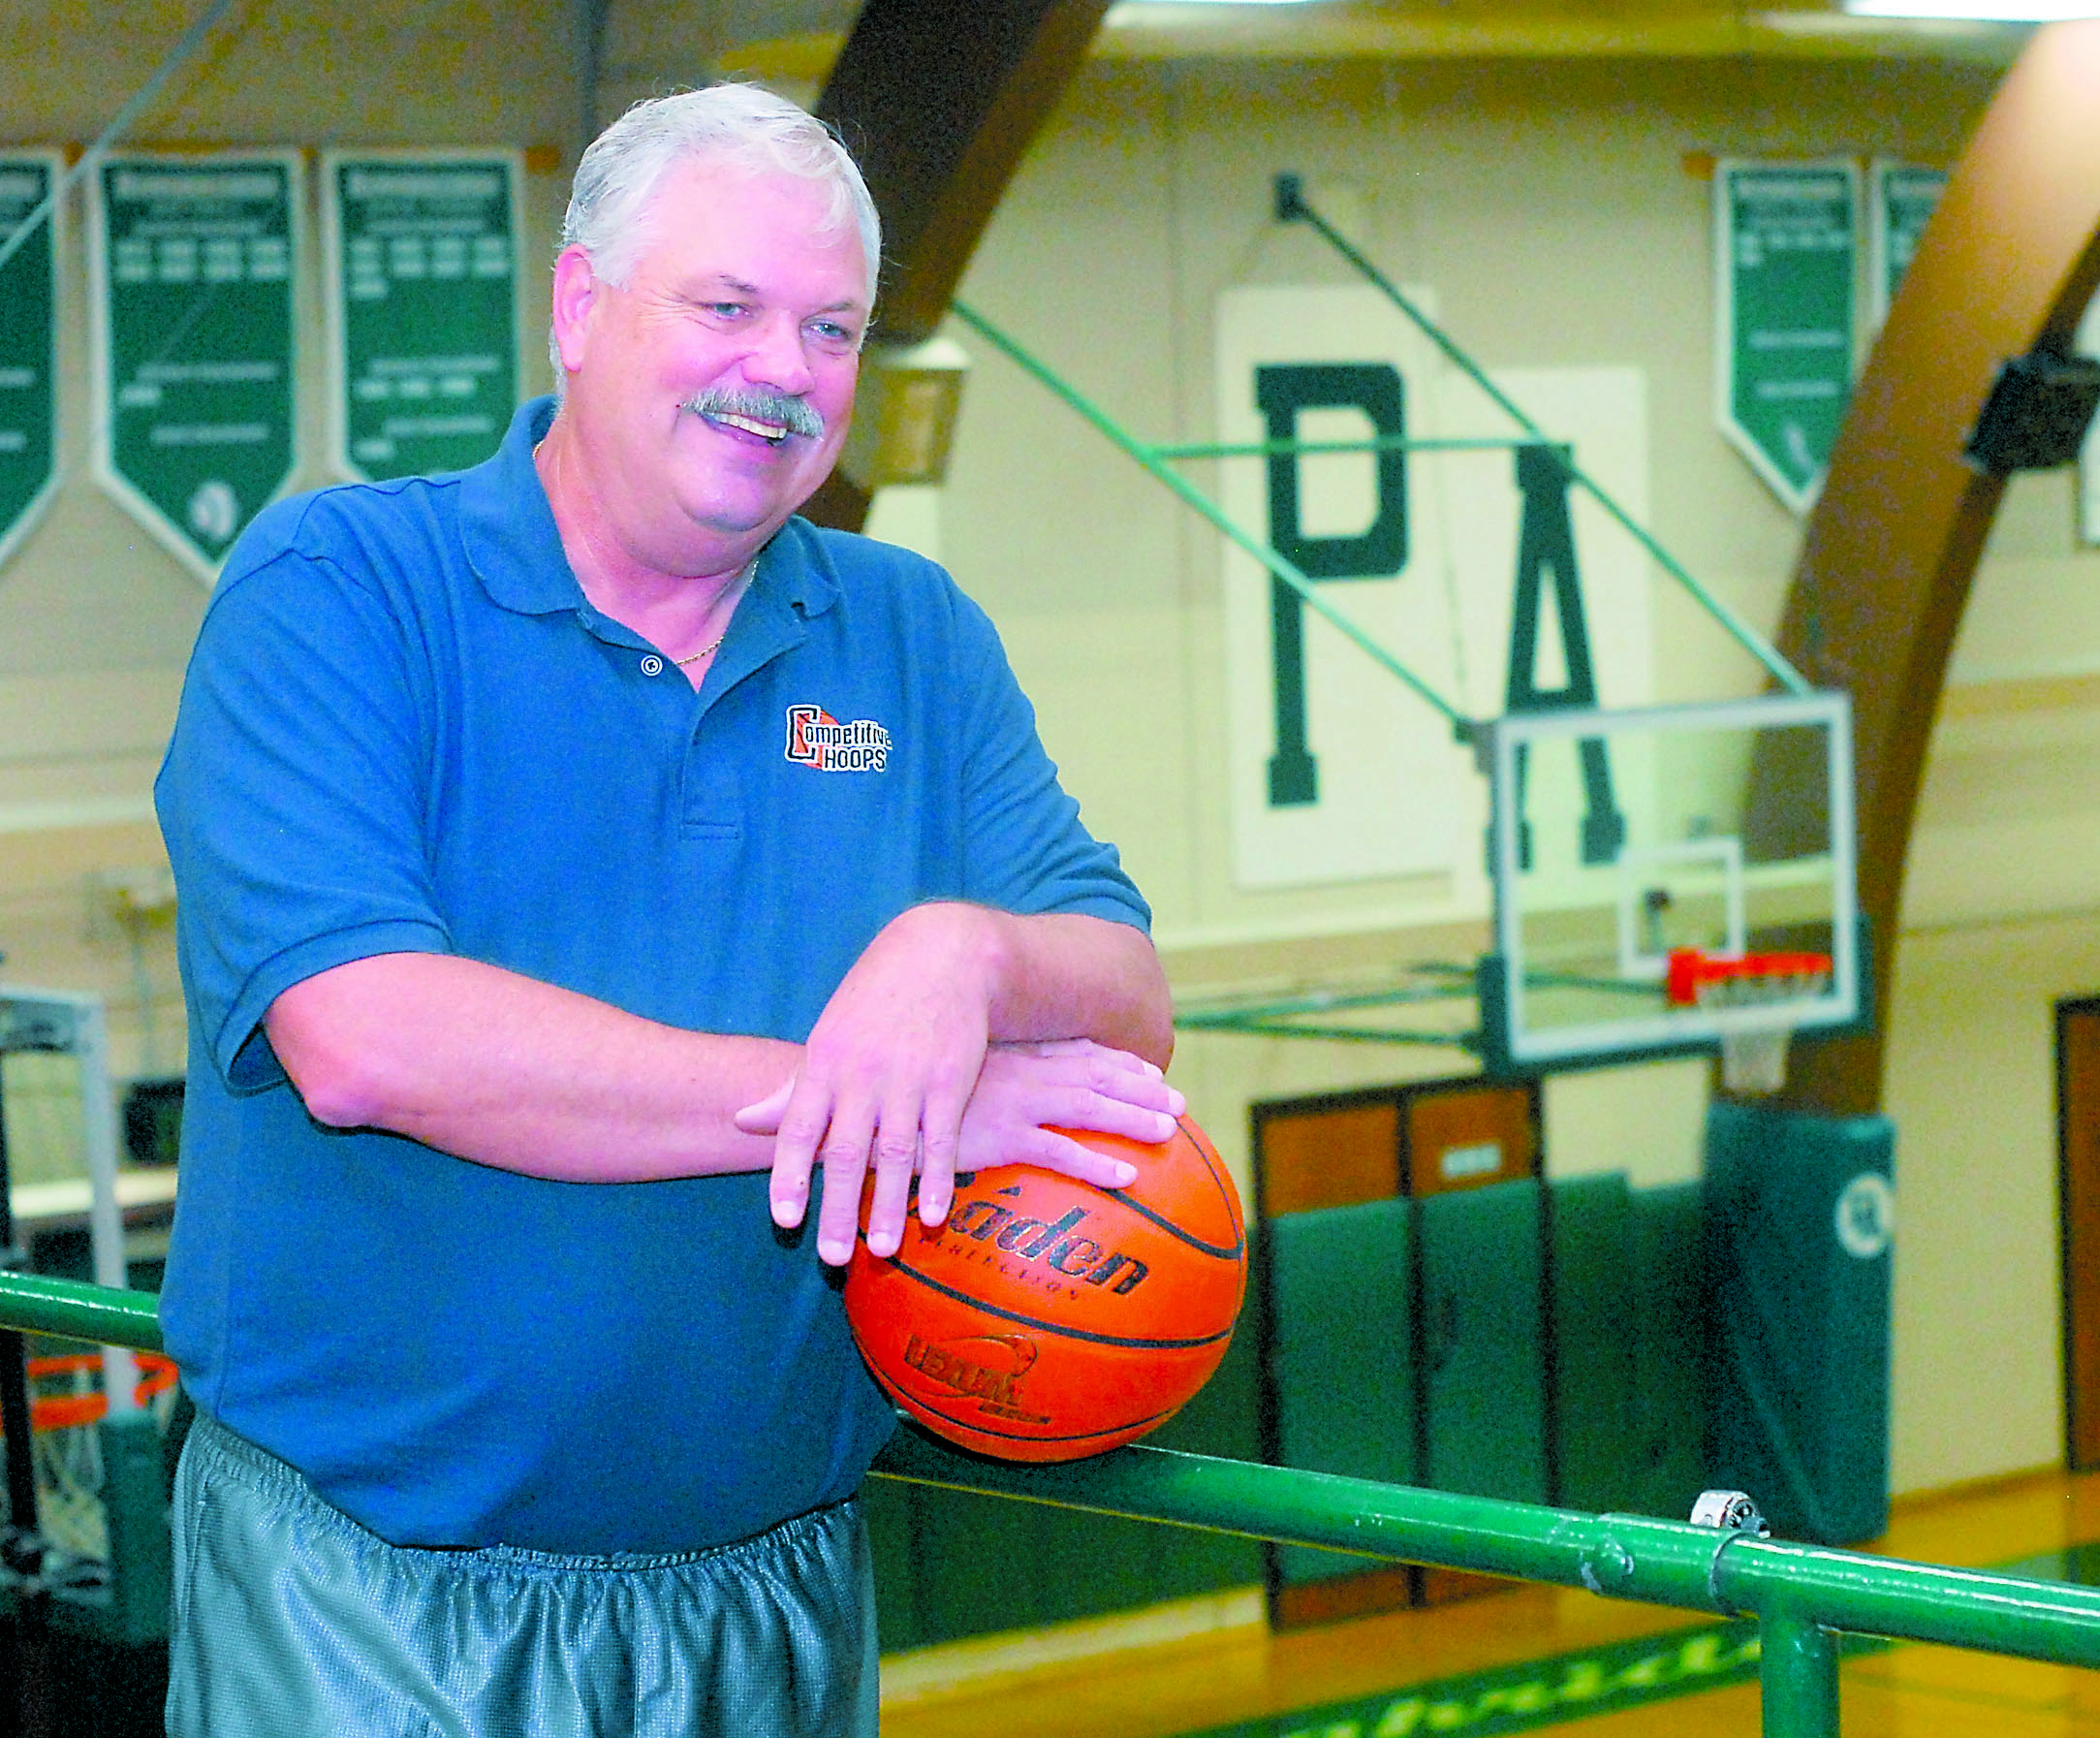 Former longtime High School boys basketball coach Lee Sinnes will be inducted Thursday into the Washington State Basketball Coaches Association Hall of Fame in Tacoma. Keith Thorpe/Peninsula Daily News